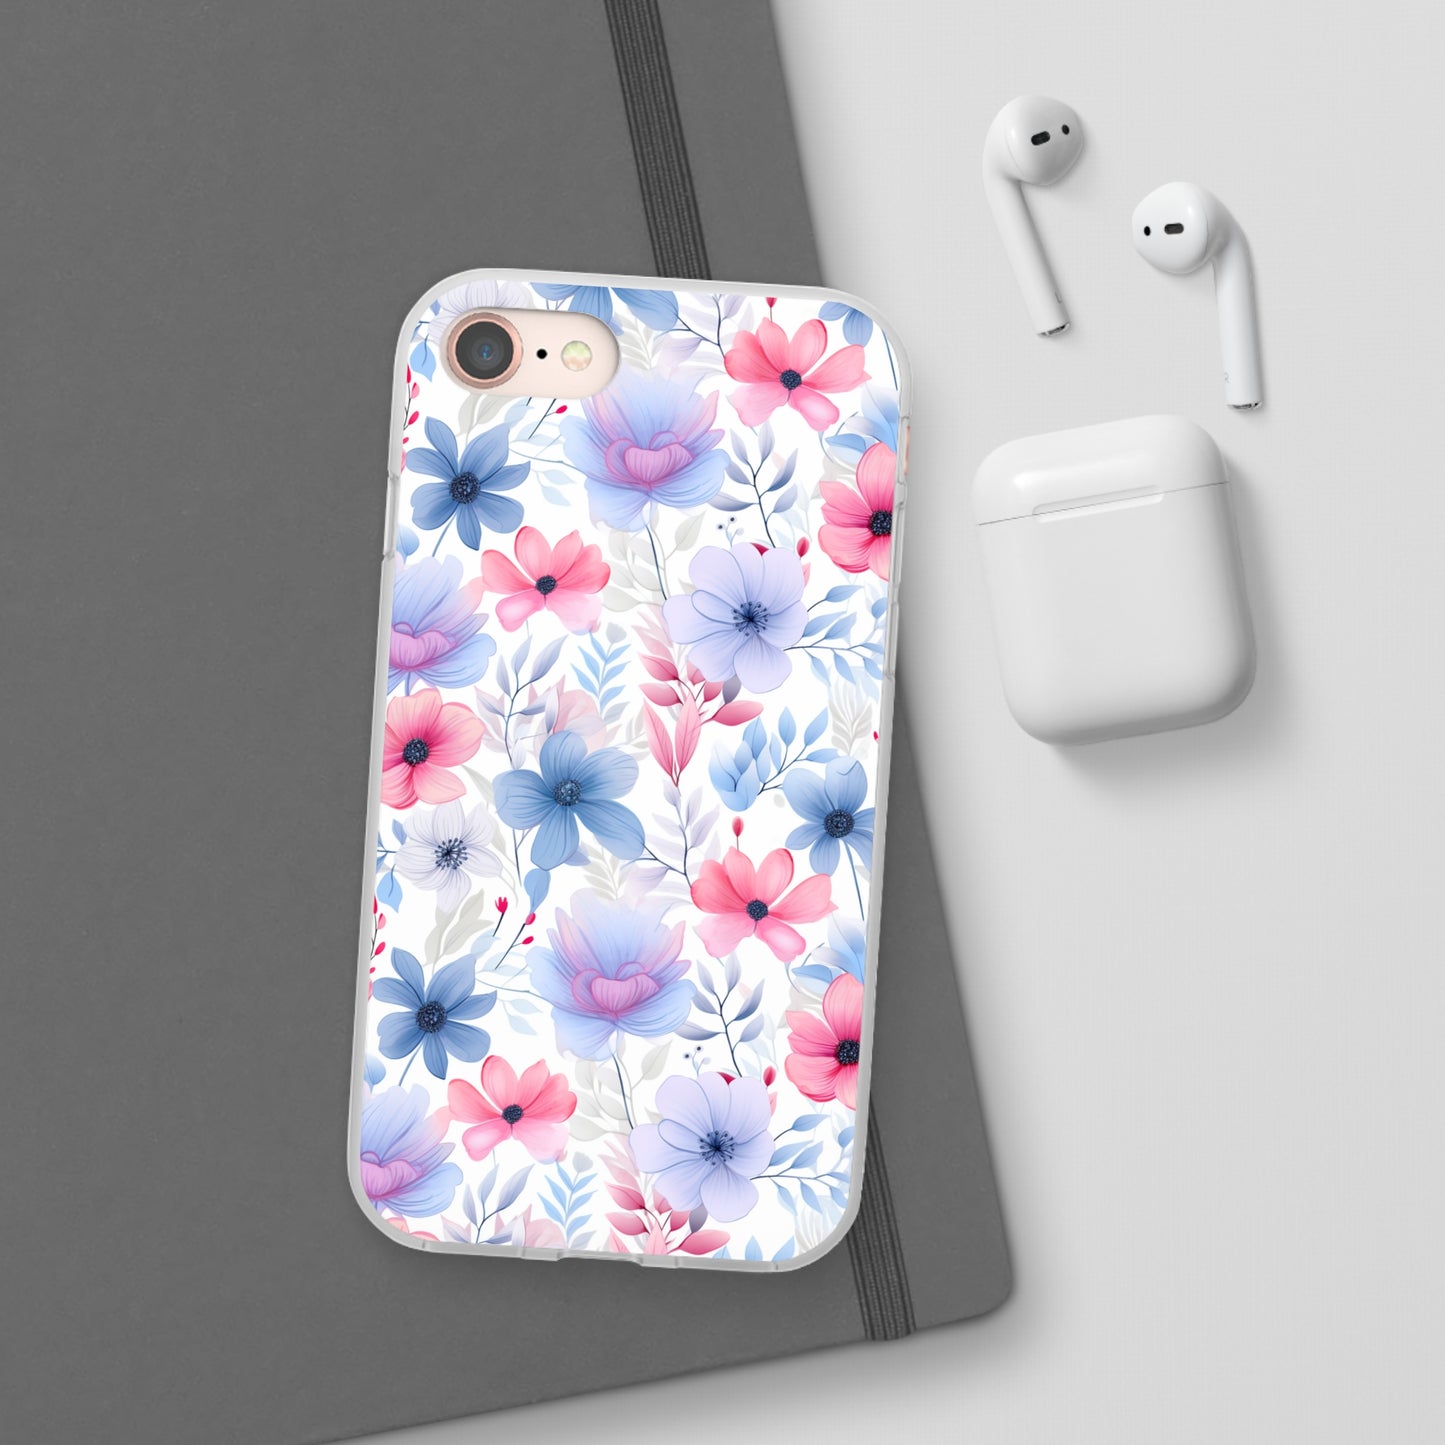 Floral Whispers - Soft Hues of Violets, Pinks, and Blues - Flexi Phone Case Phone Case Pattern Symphony iPhone 8 with gift packaging  